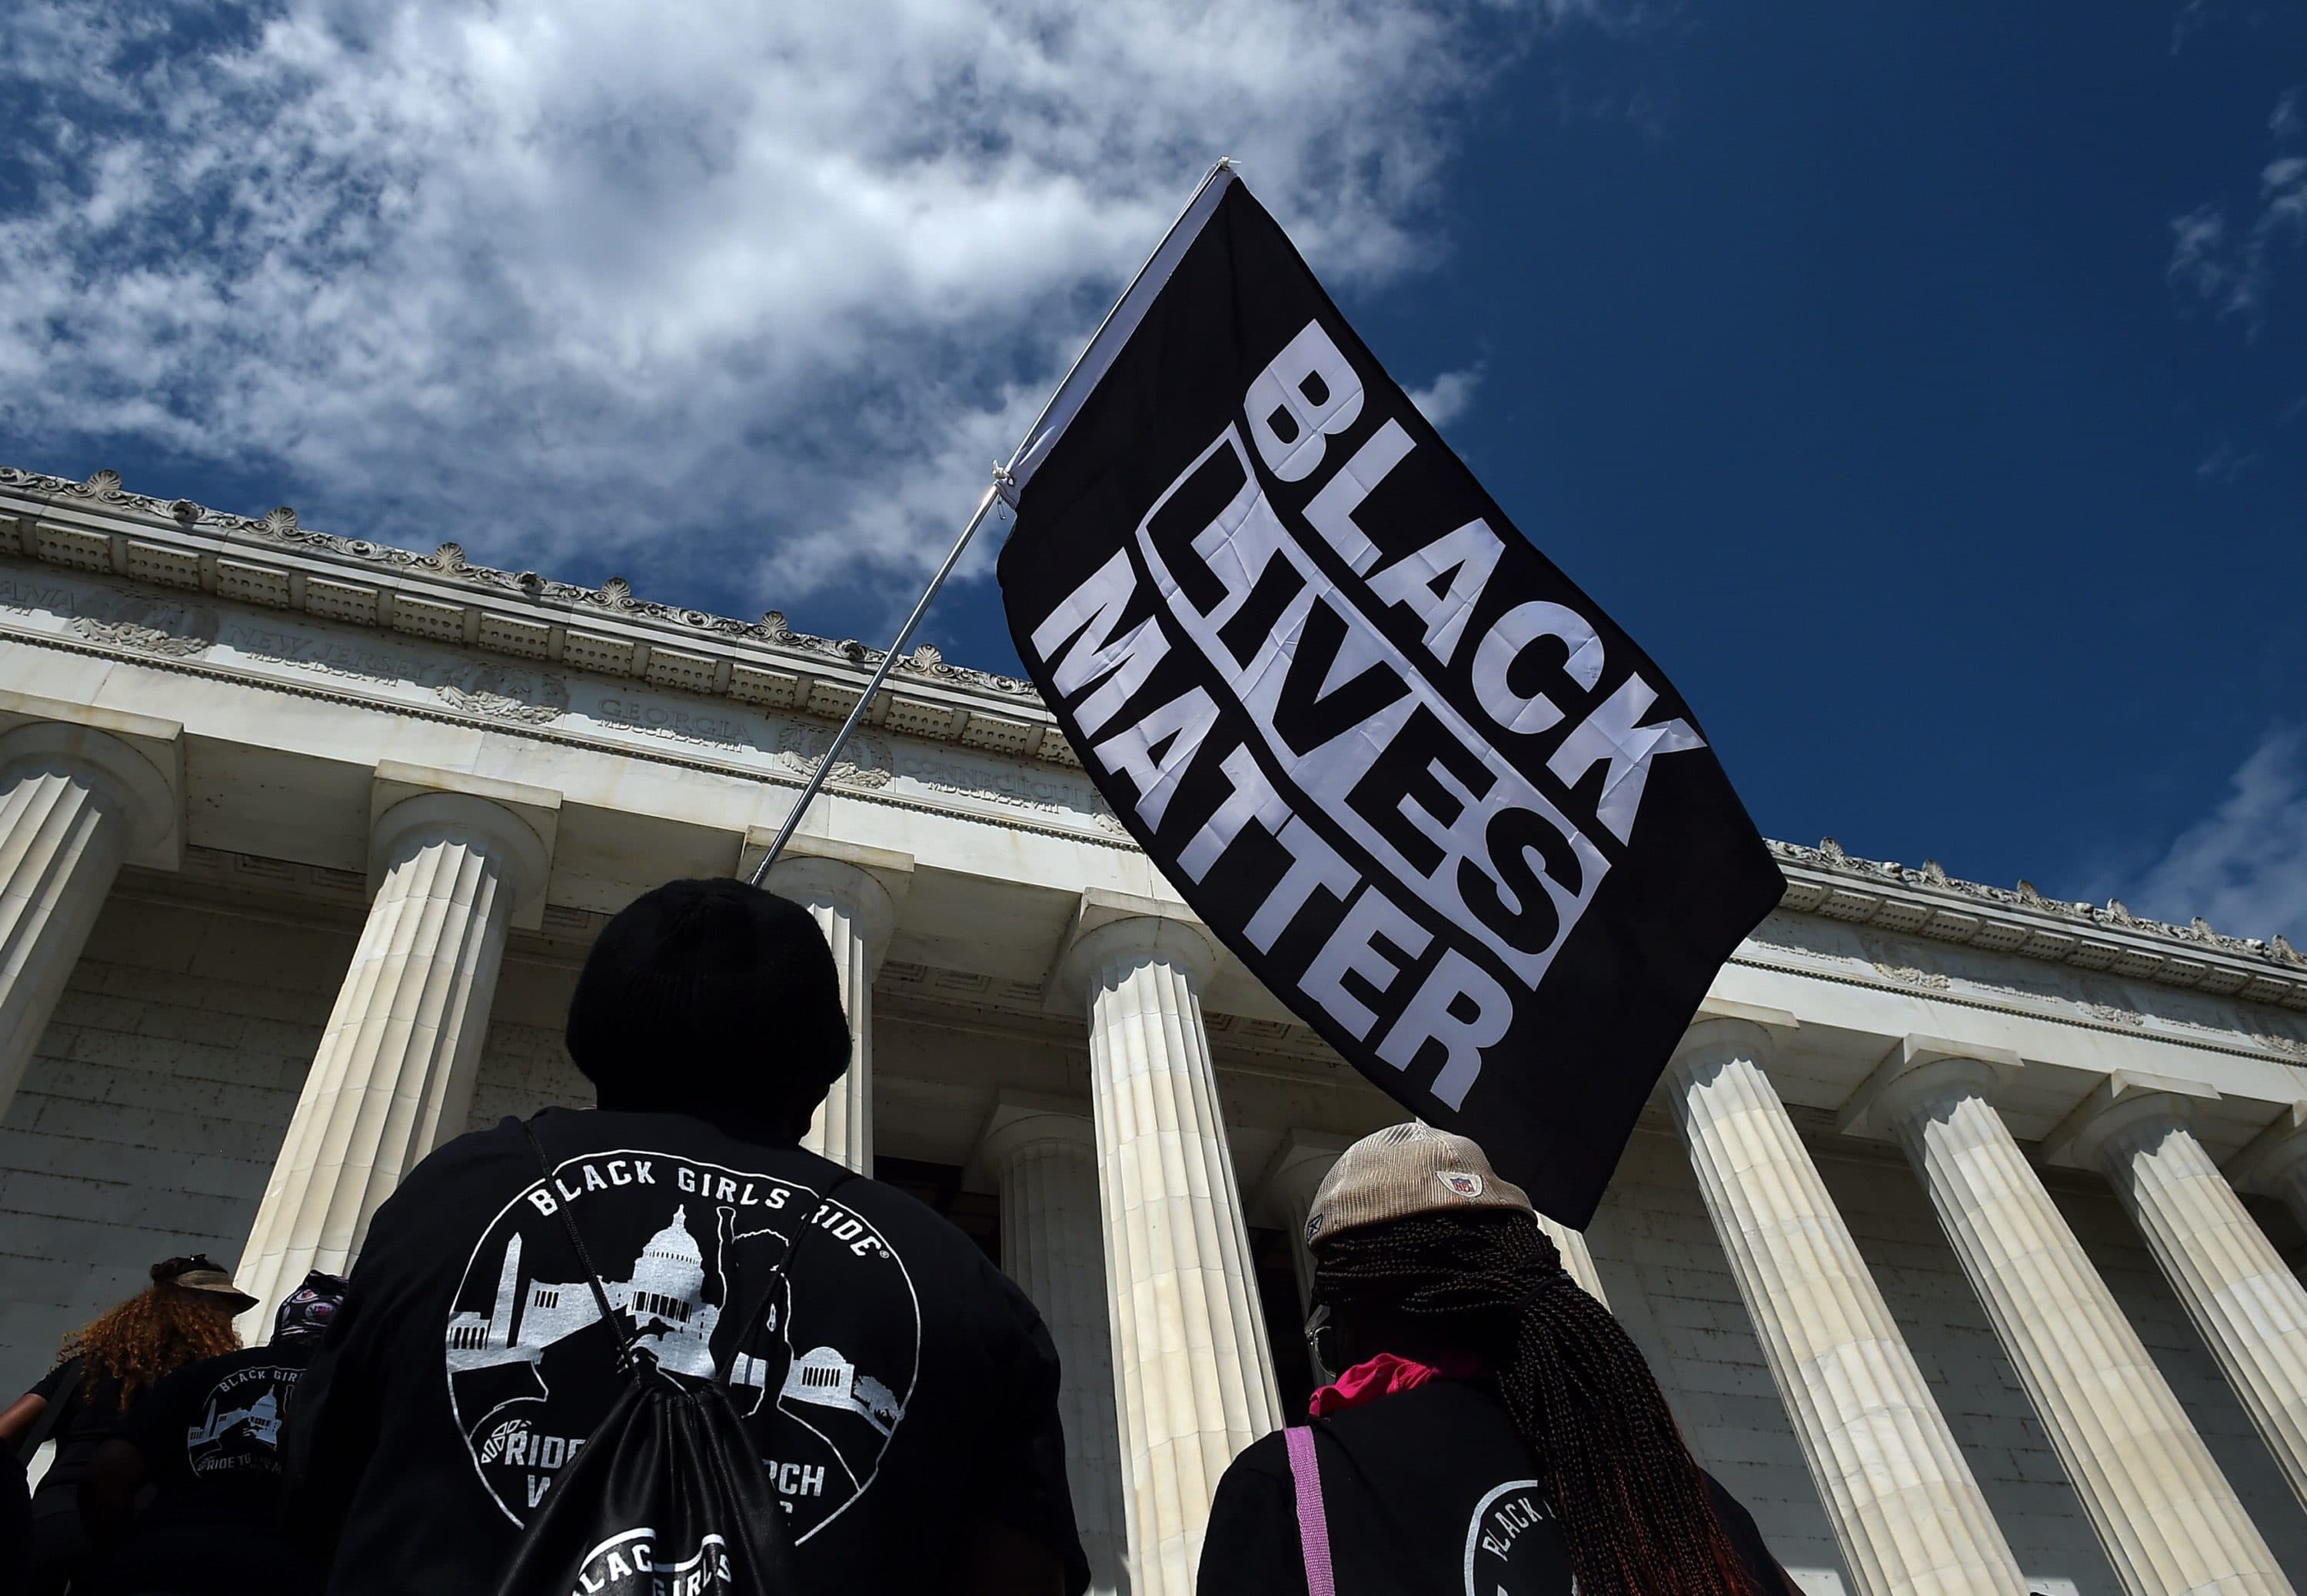 A person holds a Black Lives Matter flag during the &quot;Commitment March: Get Your Knee Off Our Necks&quot; protest against racism and police brutality, at the Lincoln Memorial on August 28, 2020, in Washington DC. (Olivier Douliery/POOL/AFP via Getty Images)